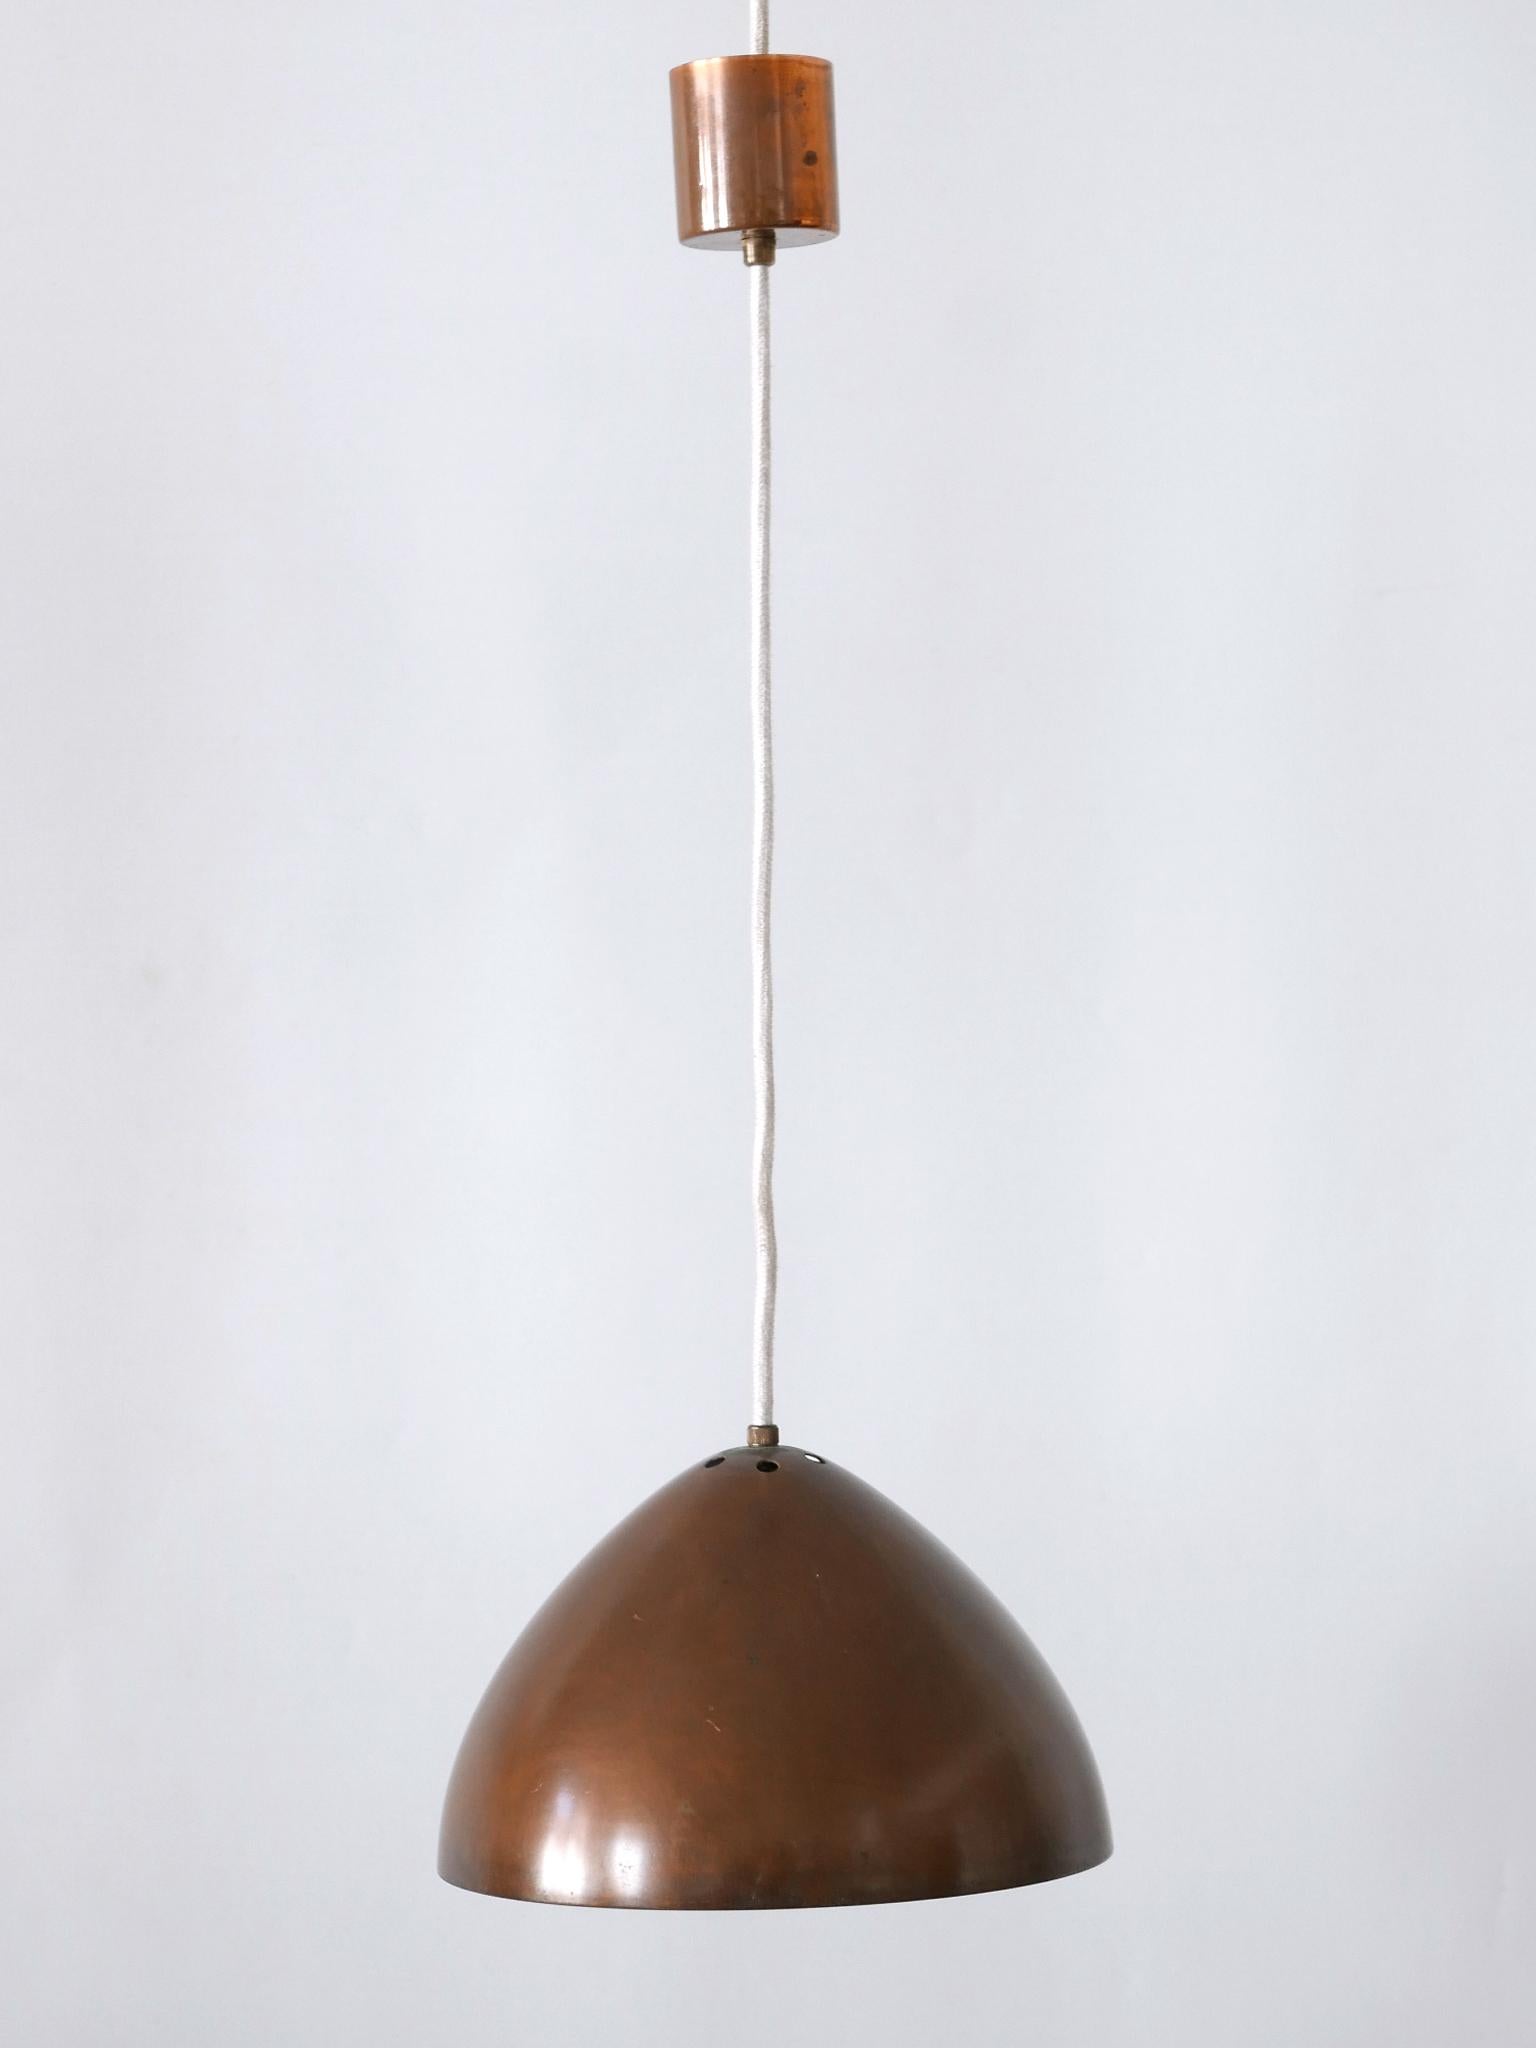 Rare, lovely and elegant Mid-Century Modern copper pendant lamp or hanging light. Designed & manufactured probably in Finland, 1950s.

Executed in solid copper, the pendant lamp is executed with 1 x E127 / E26 Edison screw fit bulb socket, wired and